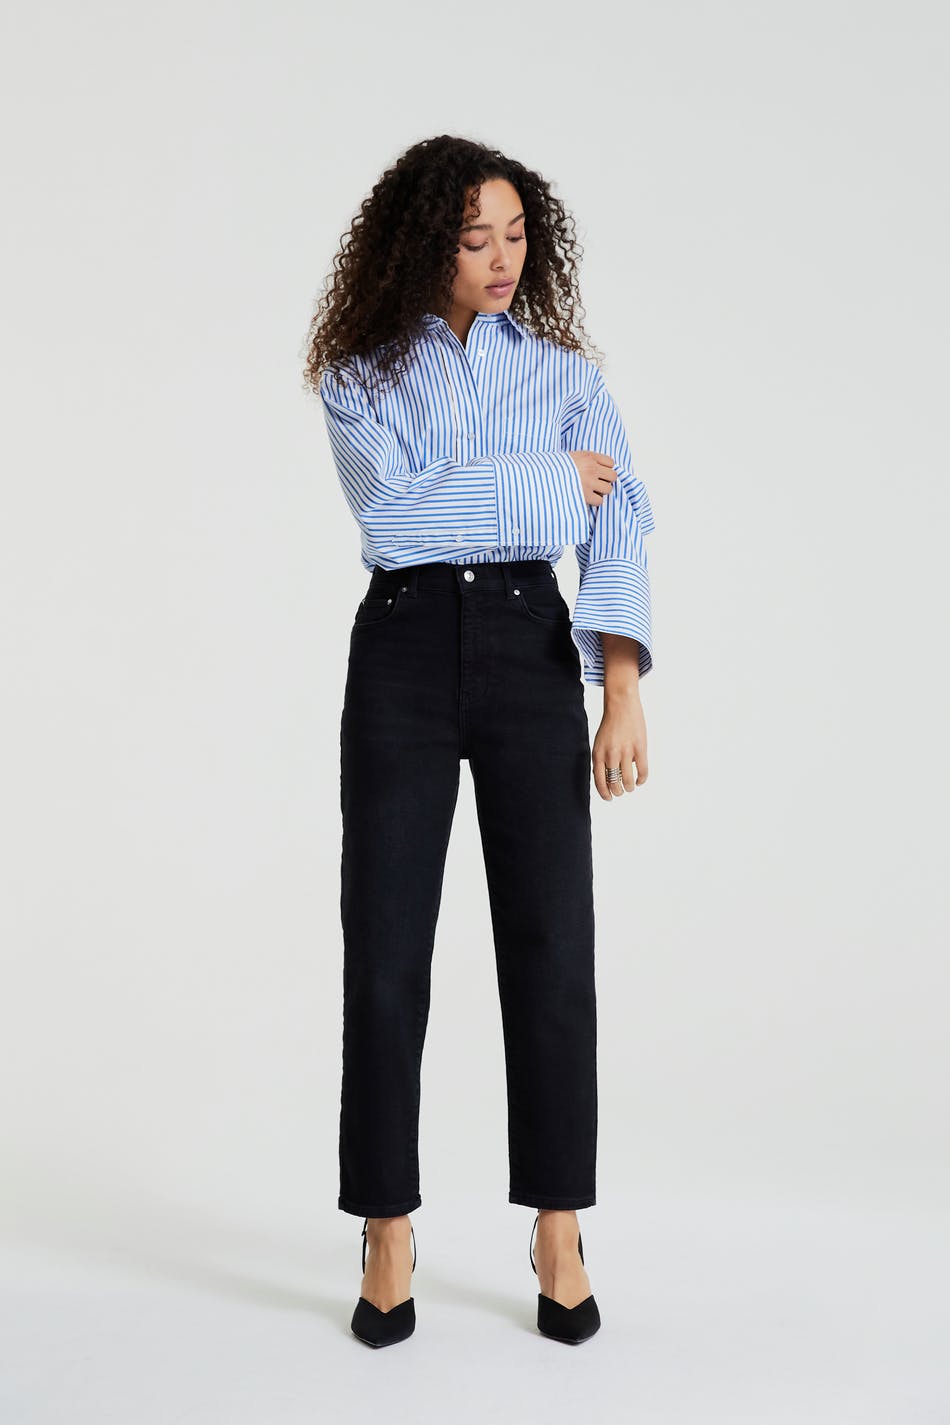 petite jeans Gina Tricot